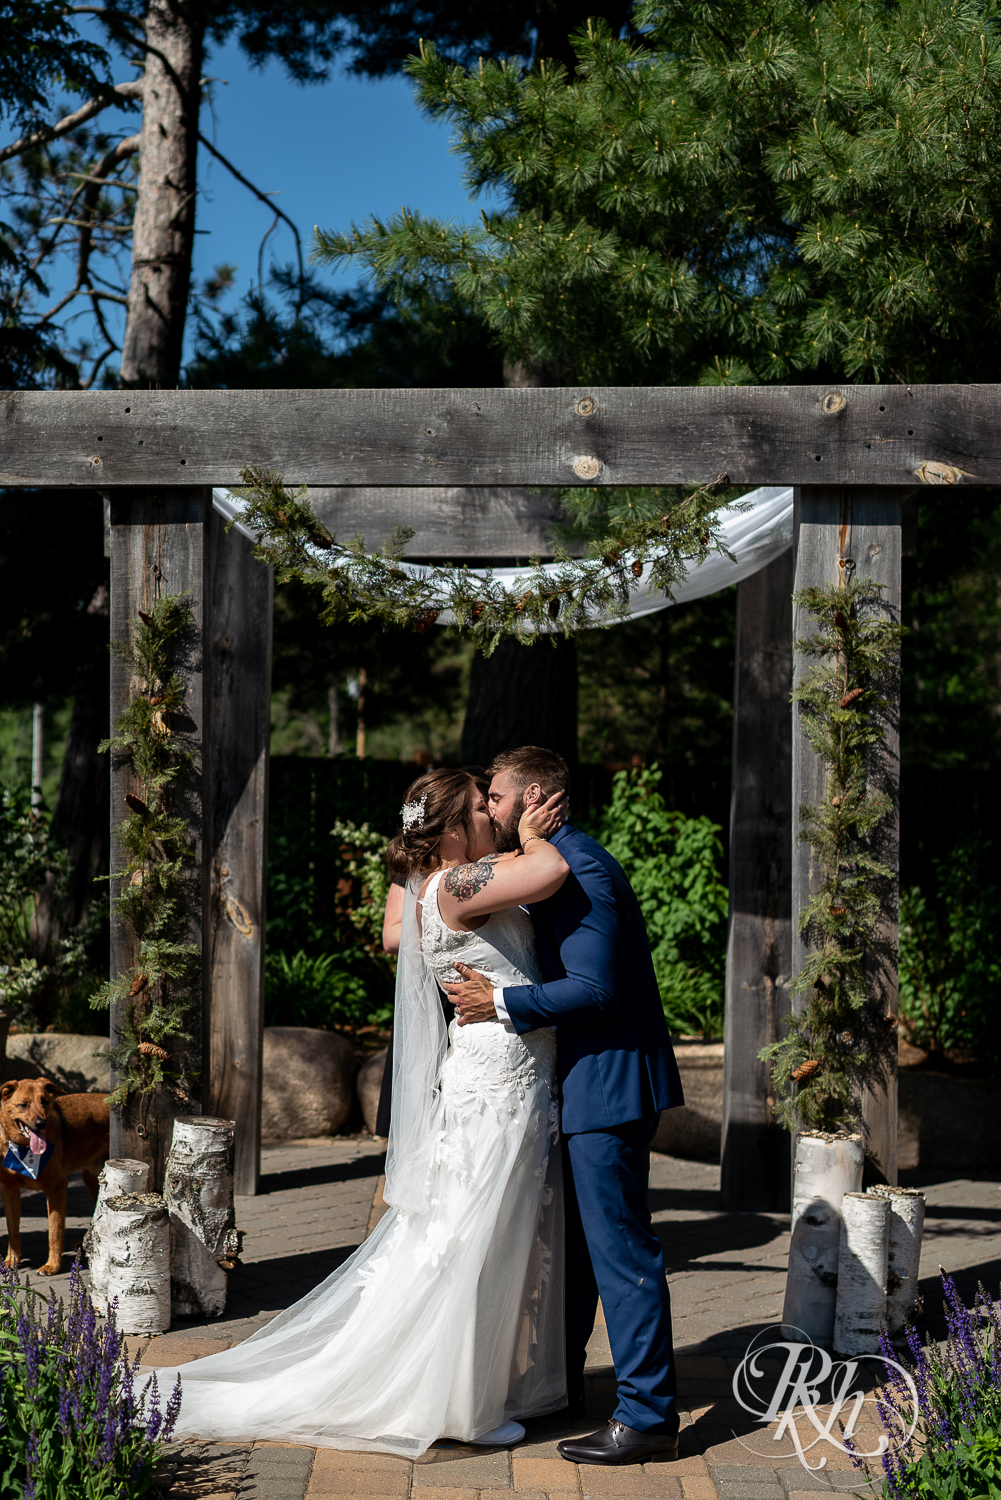 Bride and groom kiss at wedding ceremony at Pine Peaks Event Center in Pine River, Minnesota.